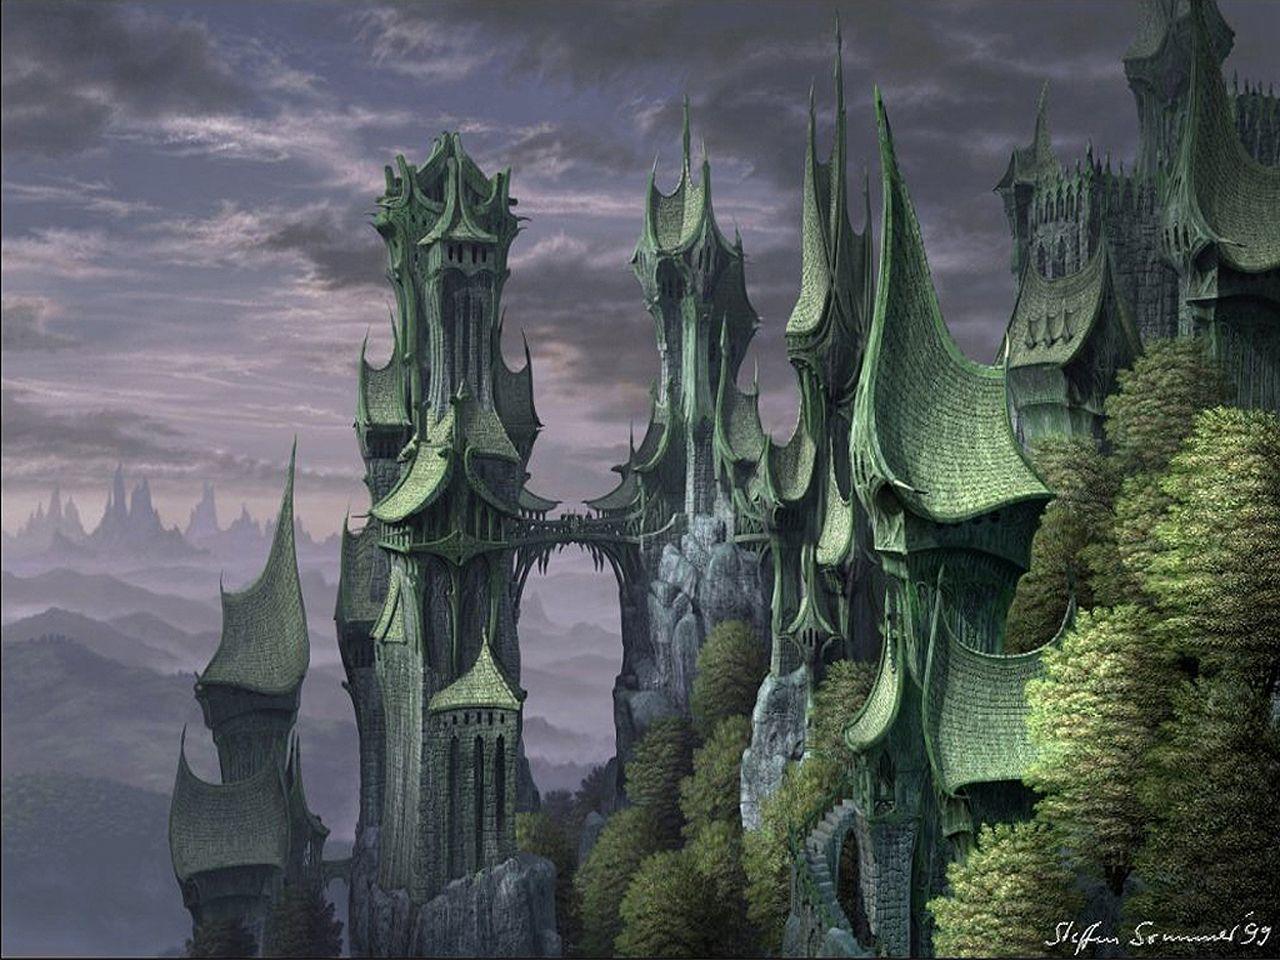 Gotta admit. This Steffan Sommer's depiction of Rivendell is